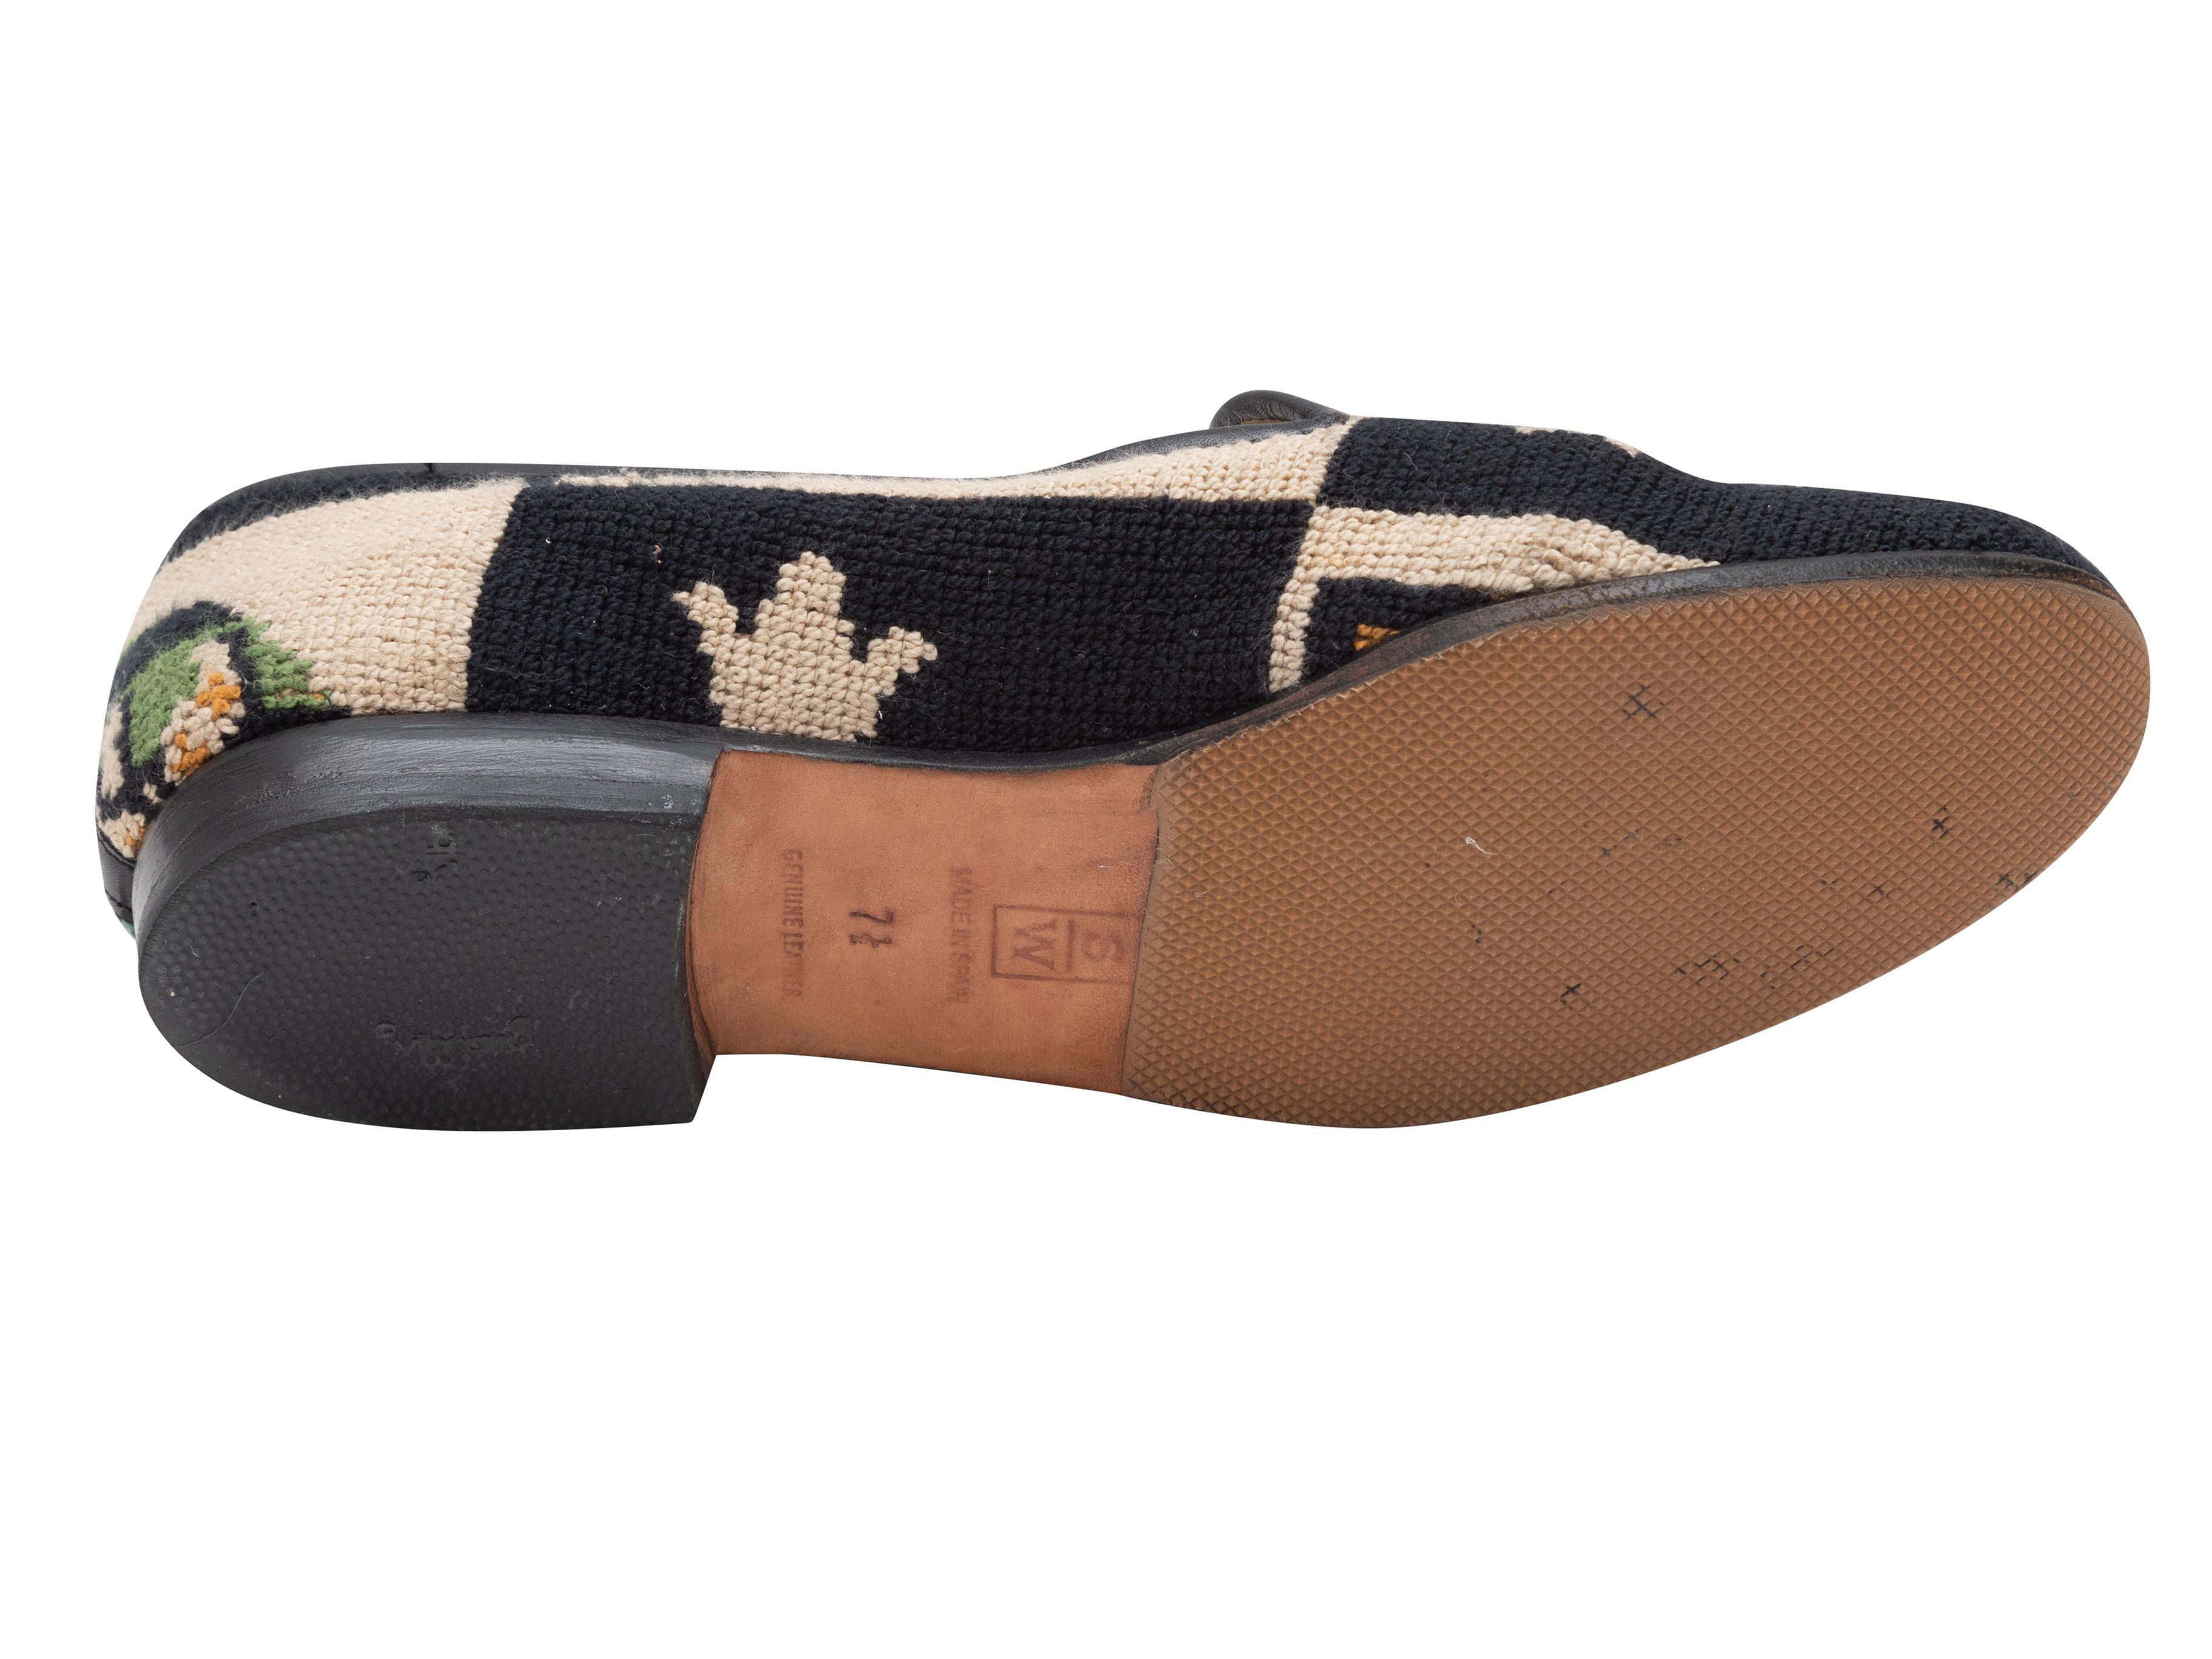 Product Details: Black and multicolor patterned needlepoint loafers by Stubbs & Wootton. Leather trim throughout. 0.75